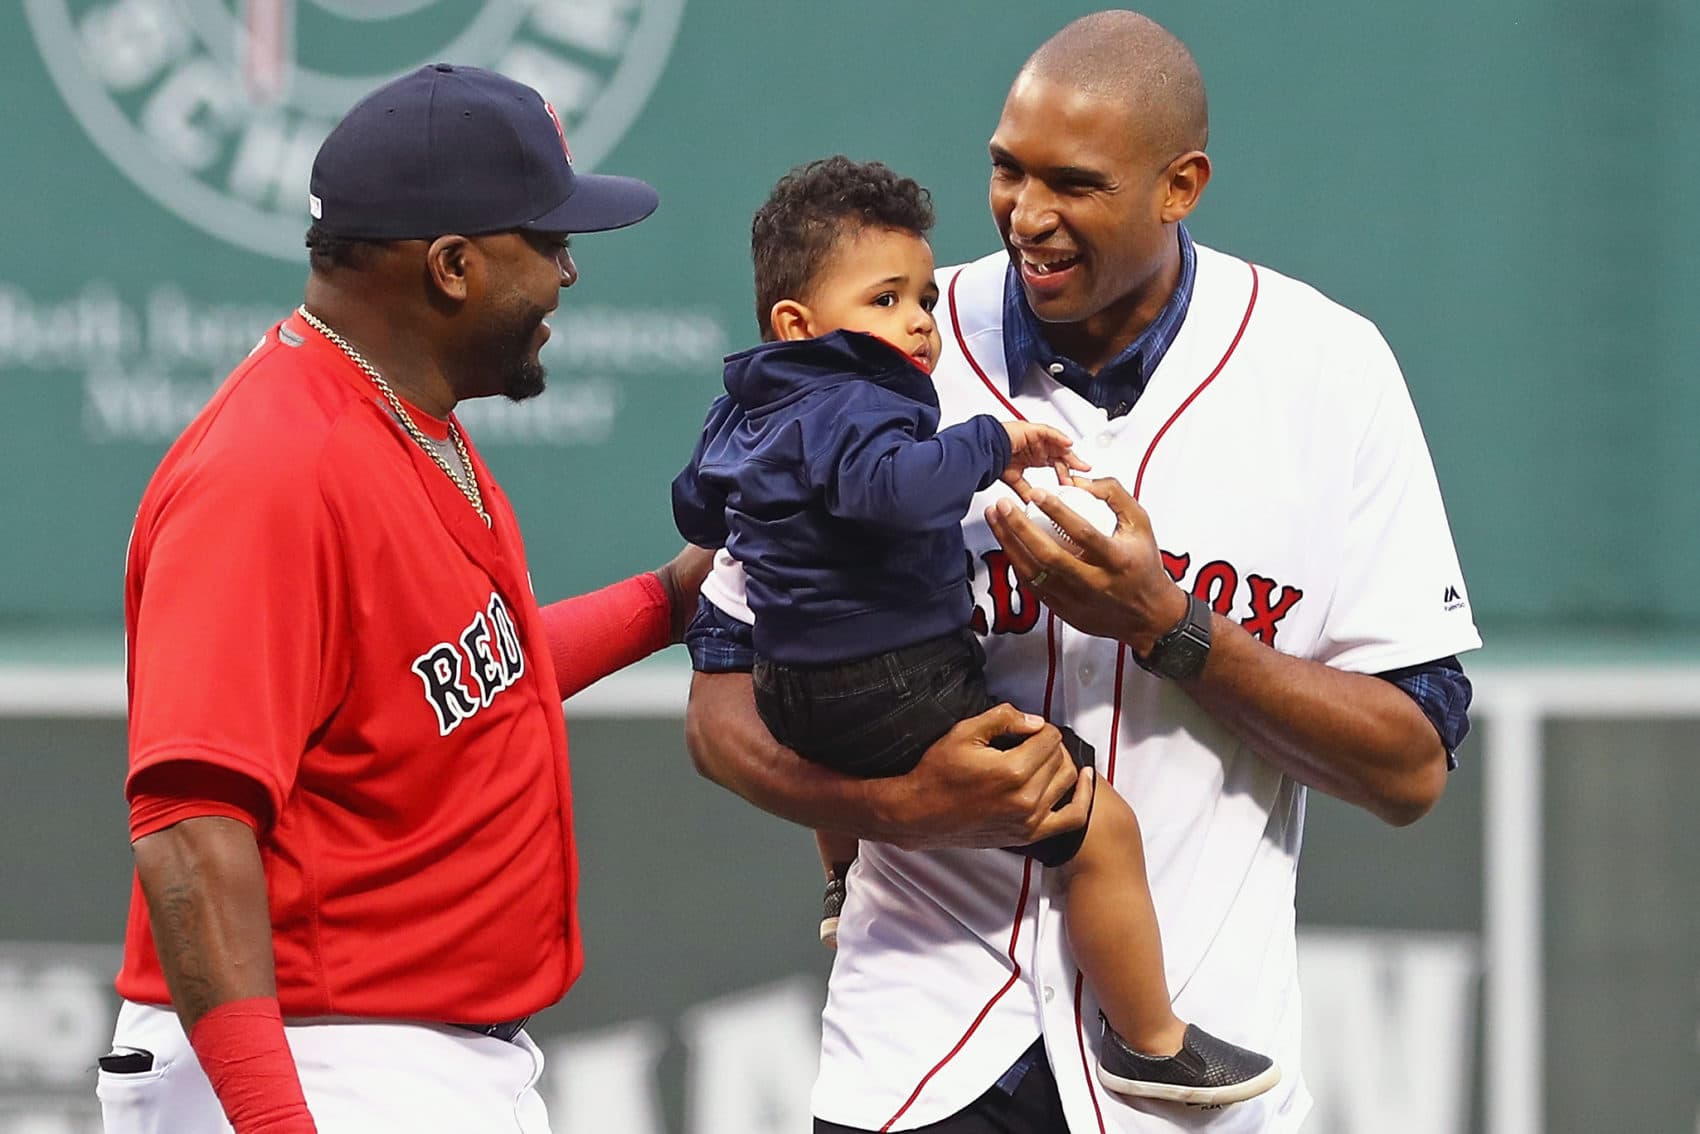 Newly signed Boston Celtic Al Horford, holding his son Ean, talks with David Ortiz after throwing out the first pitch before a game at Fenway Park in July 2016. (Maddie Meyer/Getty Images)